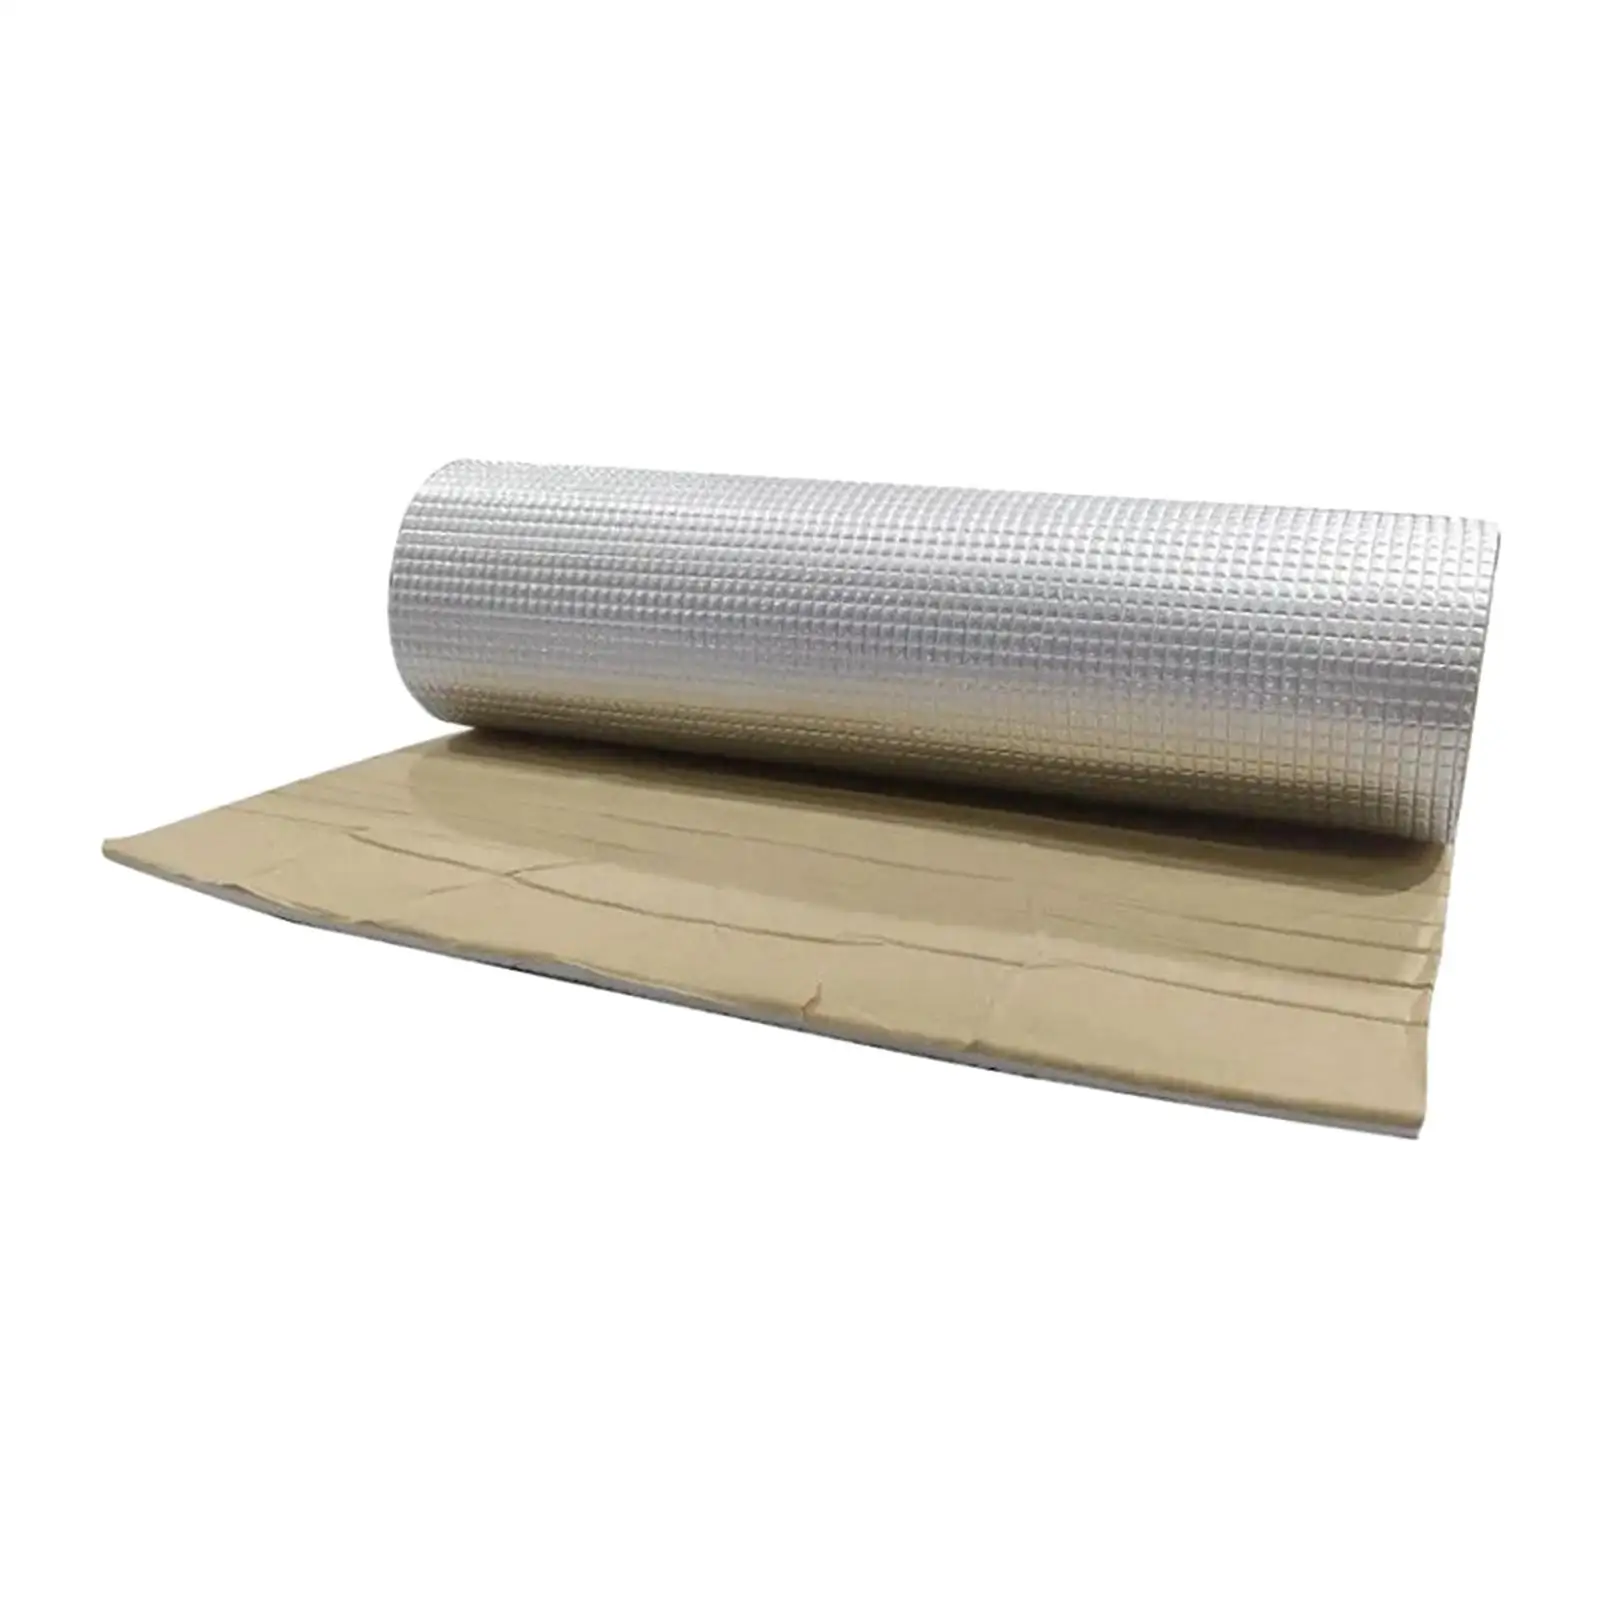 Audio Noise Insulation and Dampening Replacement Heat Sound Deadener